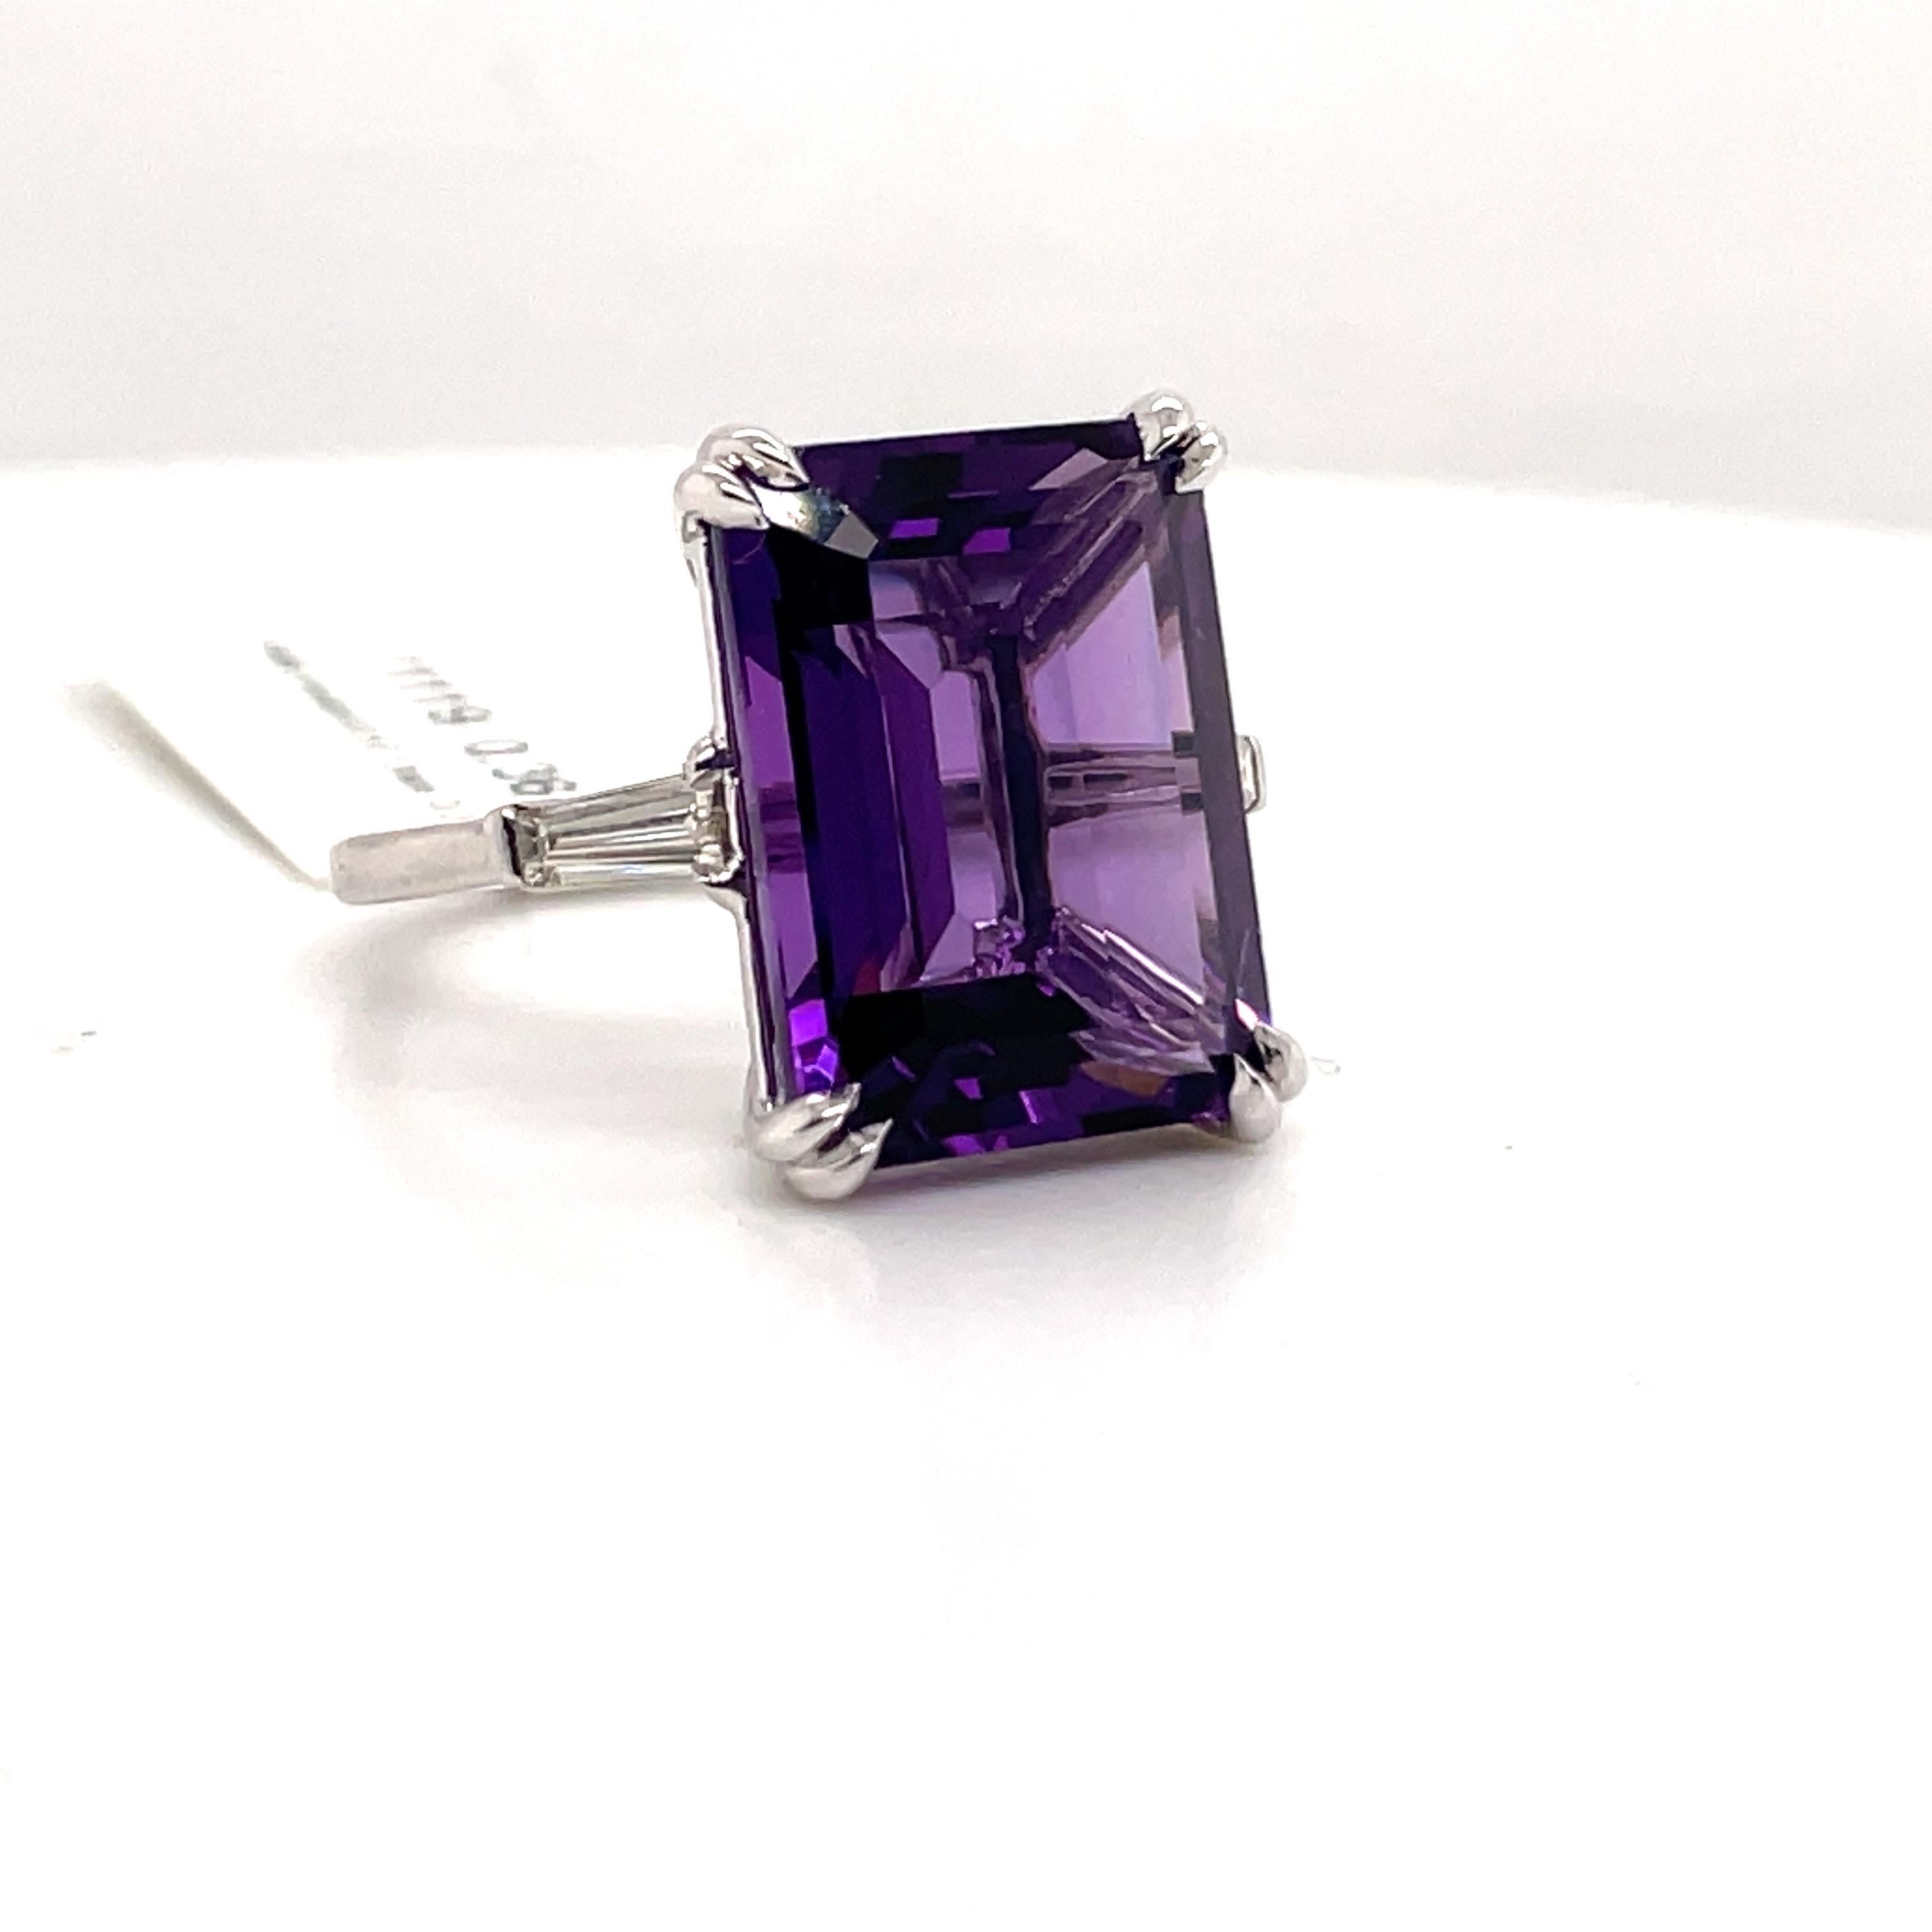 14 Karat White gold ring featuring one Emerald Cut Amethyst weighing 1-.57 carats flanked with two tapered baguettes weighing 0.36 carats. 
Color G-H
Clarity VS